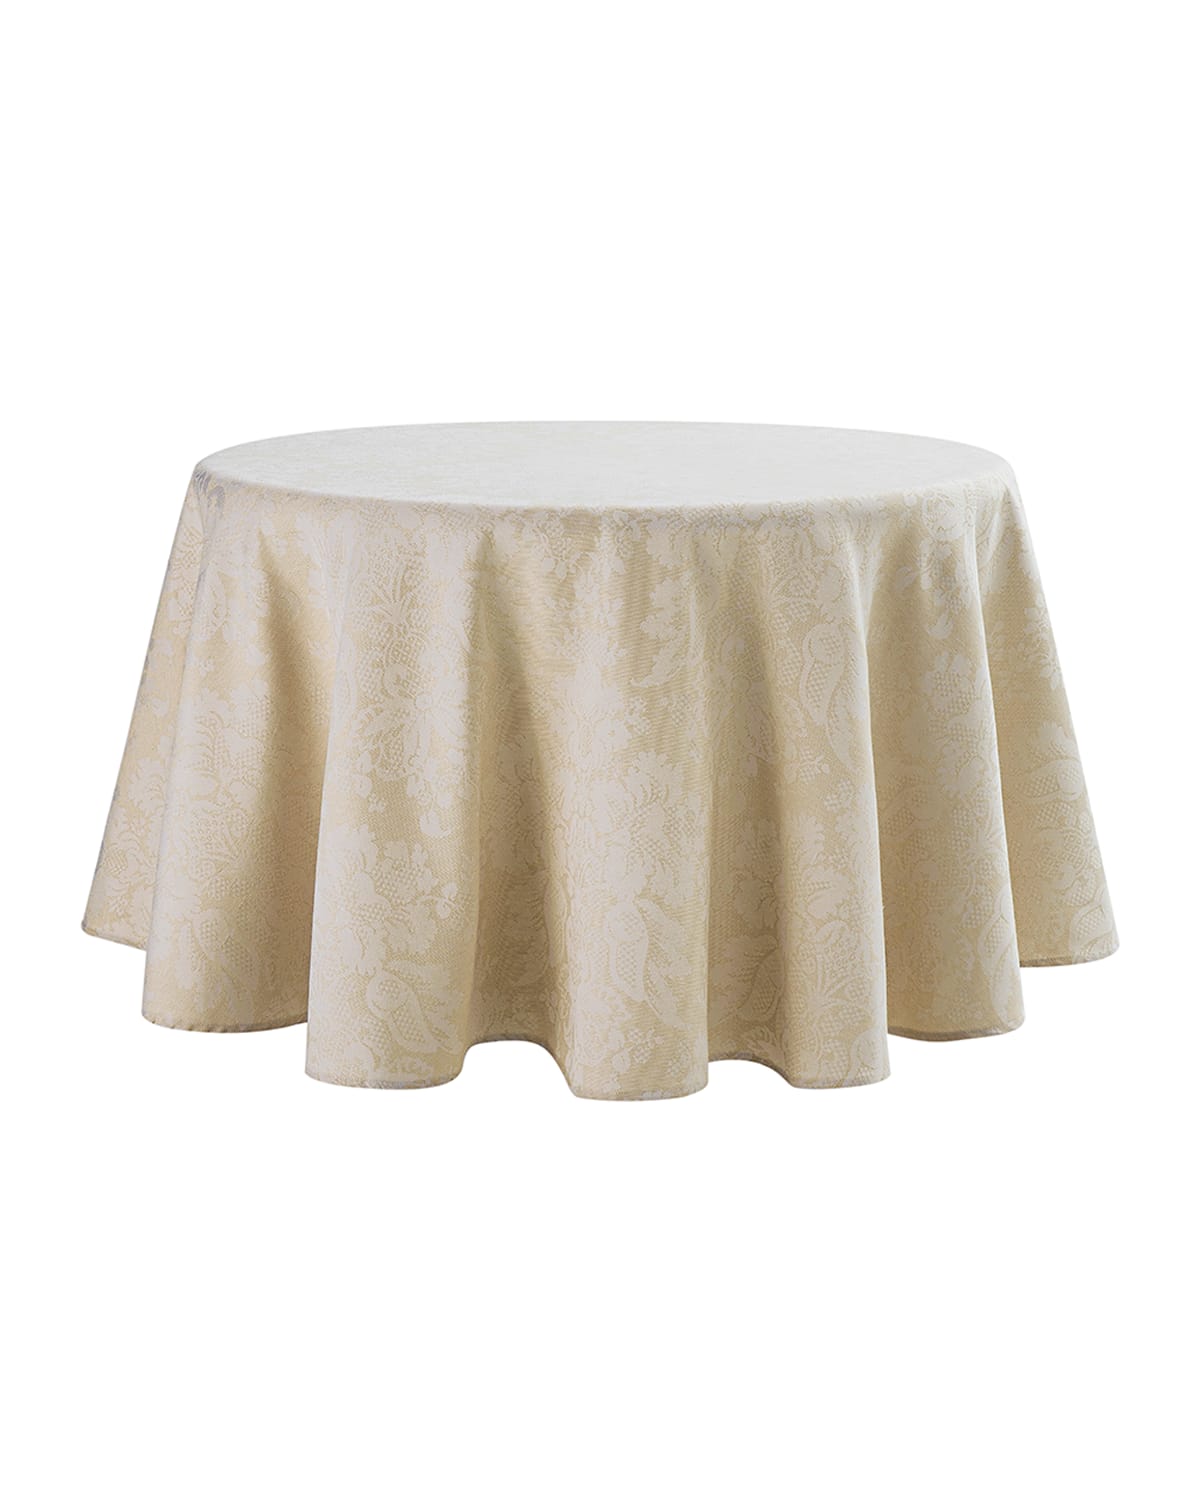 Image Waterford Berrigan Round Tablecloth, 90"Dia.